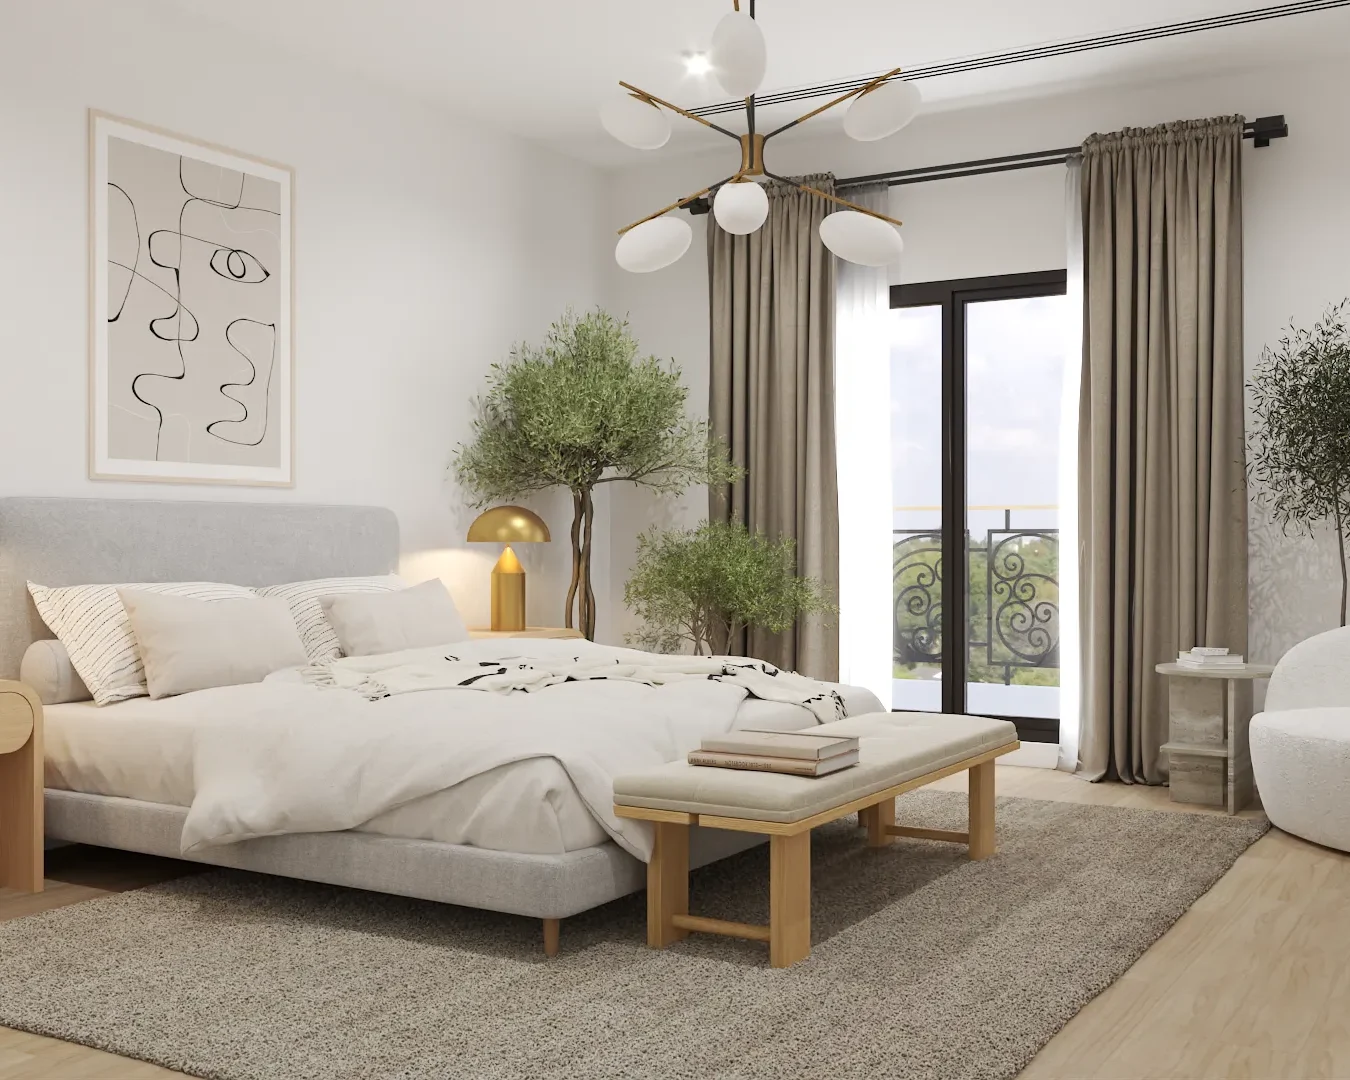 Minimalist bedroom featuring a low-profile bed, neutral color scheme, and natural wooden elements, complemented by soft lighting and greenery, creating a tranquil and inviting space. Design by Debora, an online interior design service.